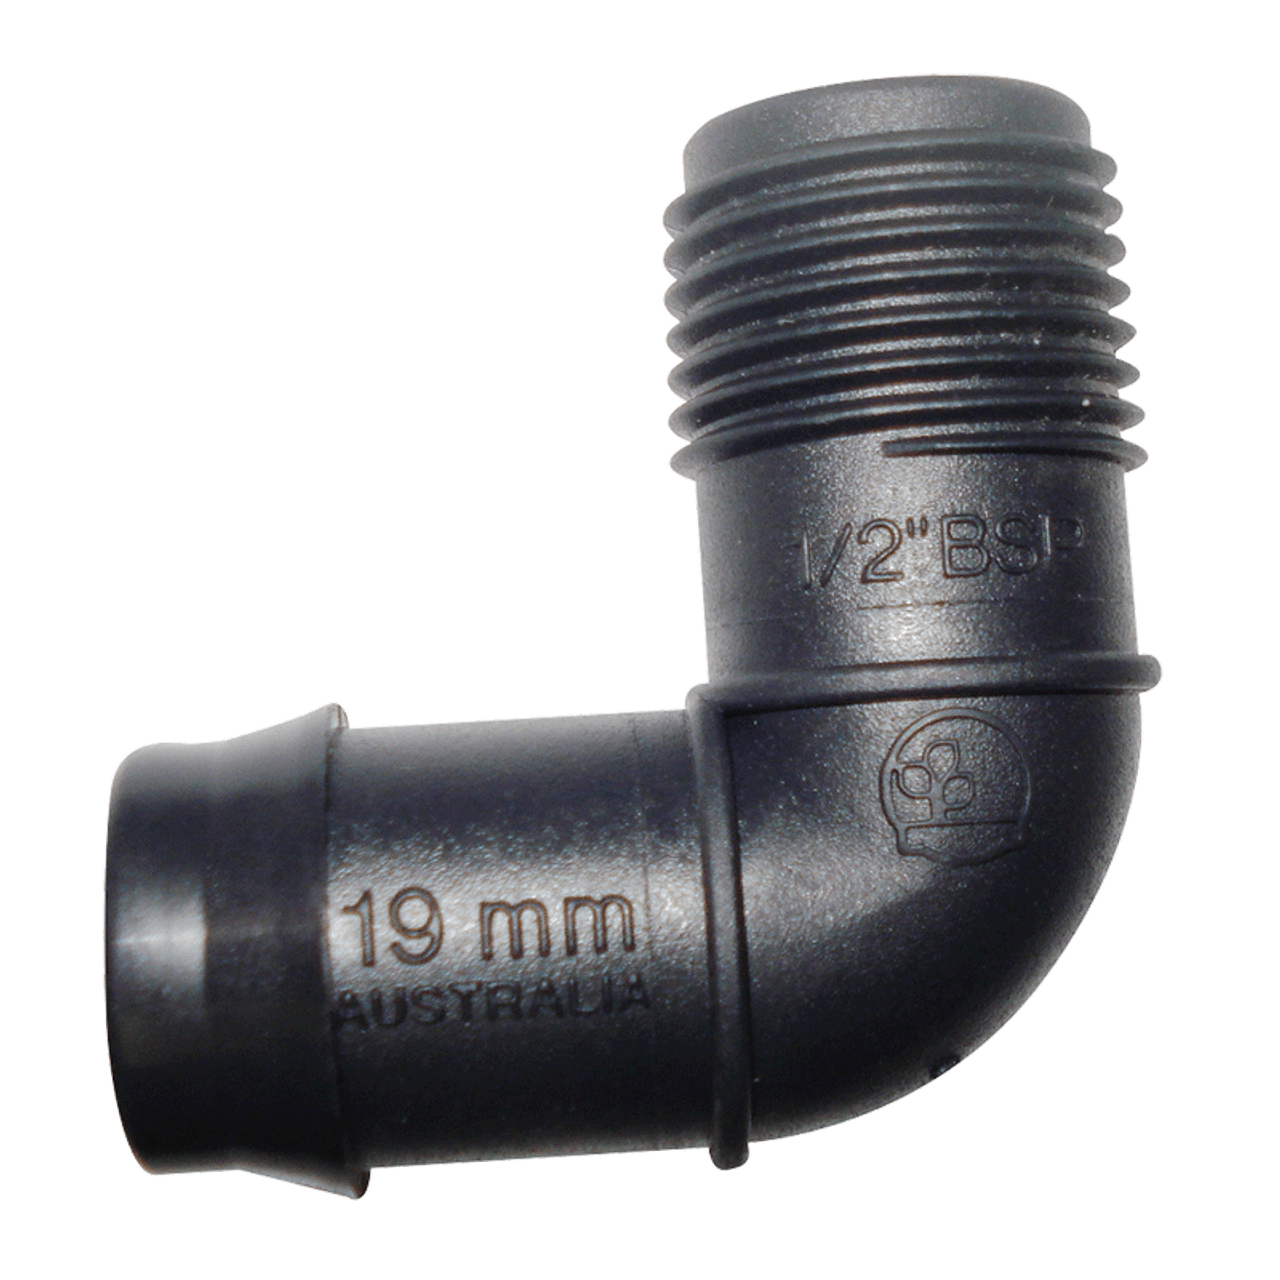 Threaded Elbow 19mm Barbed X 1/2" Bsp Male. Ebm1915 | 800-02364